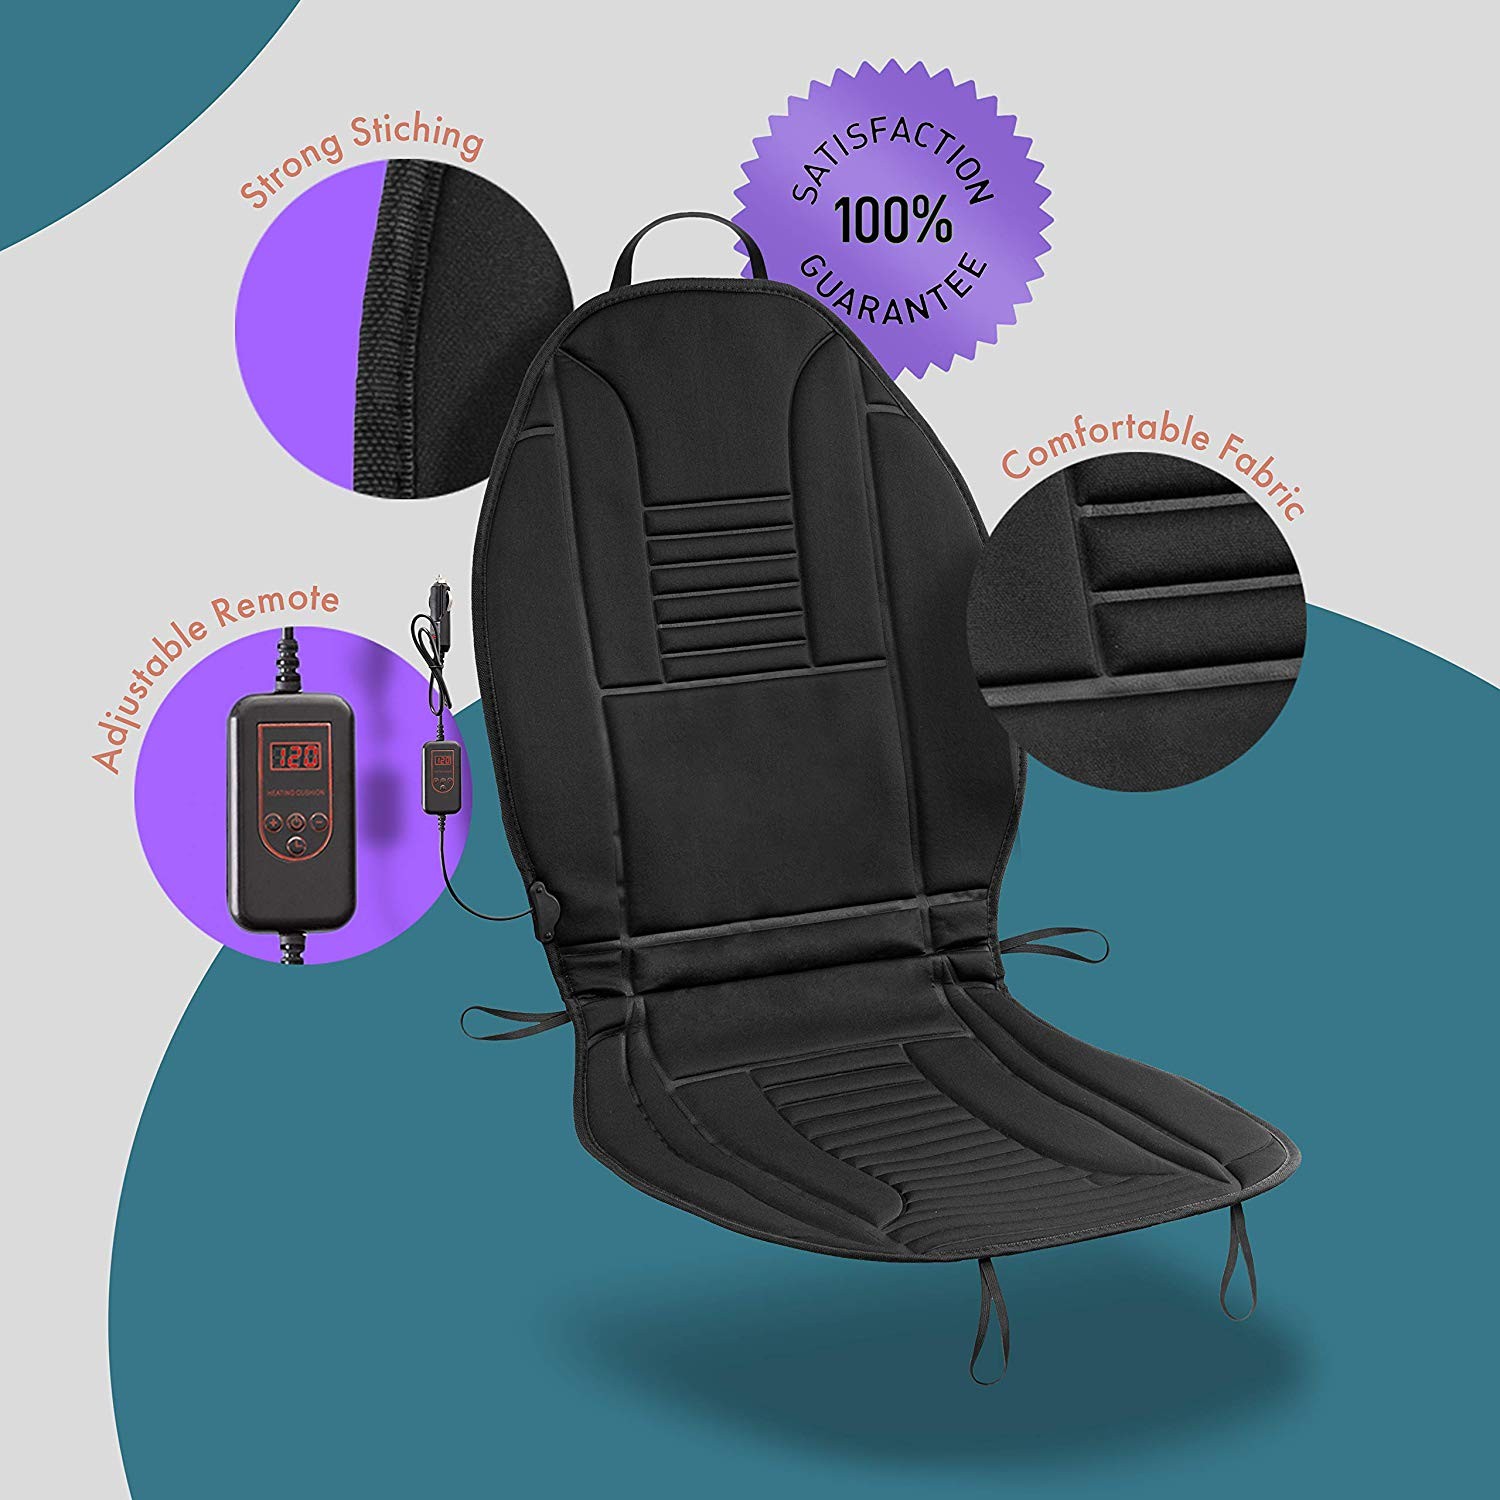 Zone Tech Cooling Car Seat Cushion Black 12v Automotive Massager Car Seat  Cooler Pad Air Conditioned Seat Cover. Perfect For Summer Road Trips :  Target